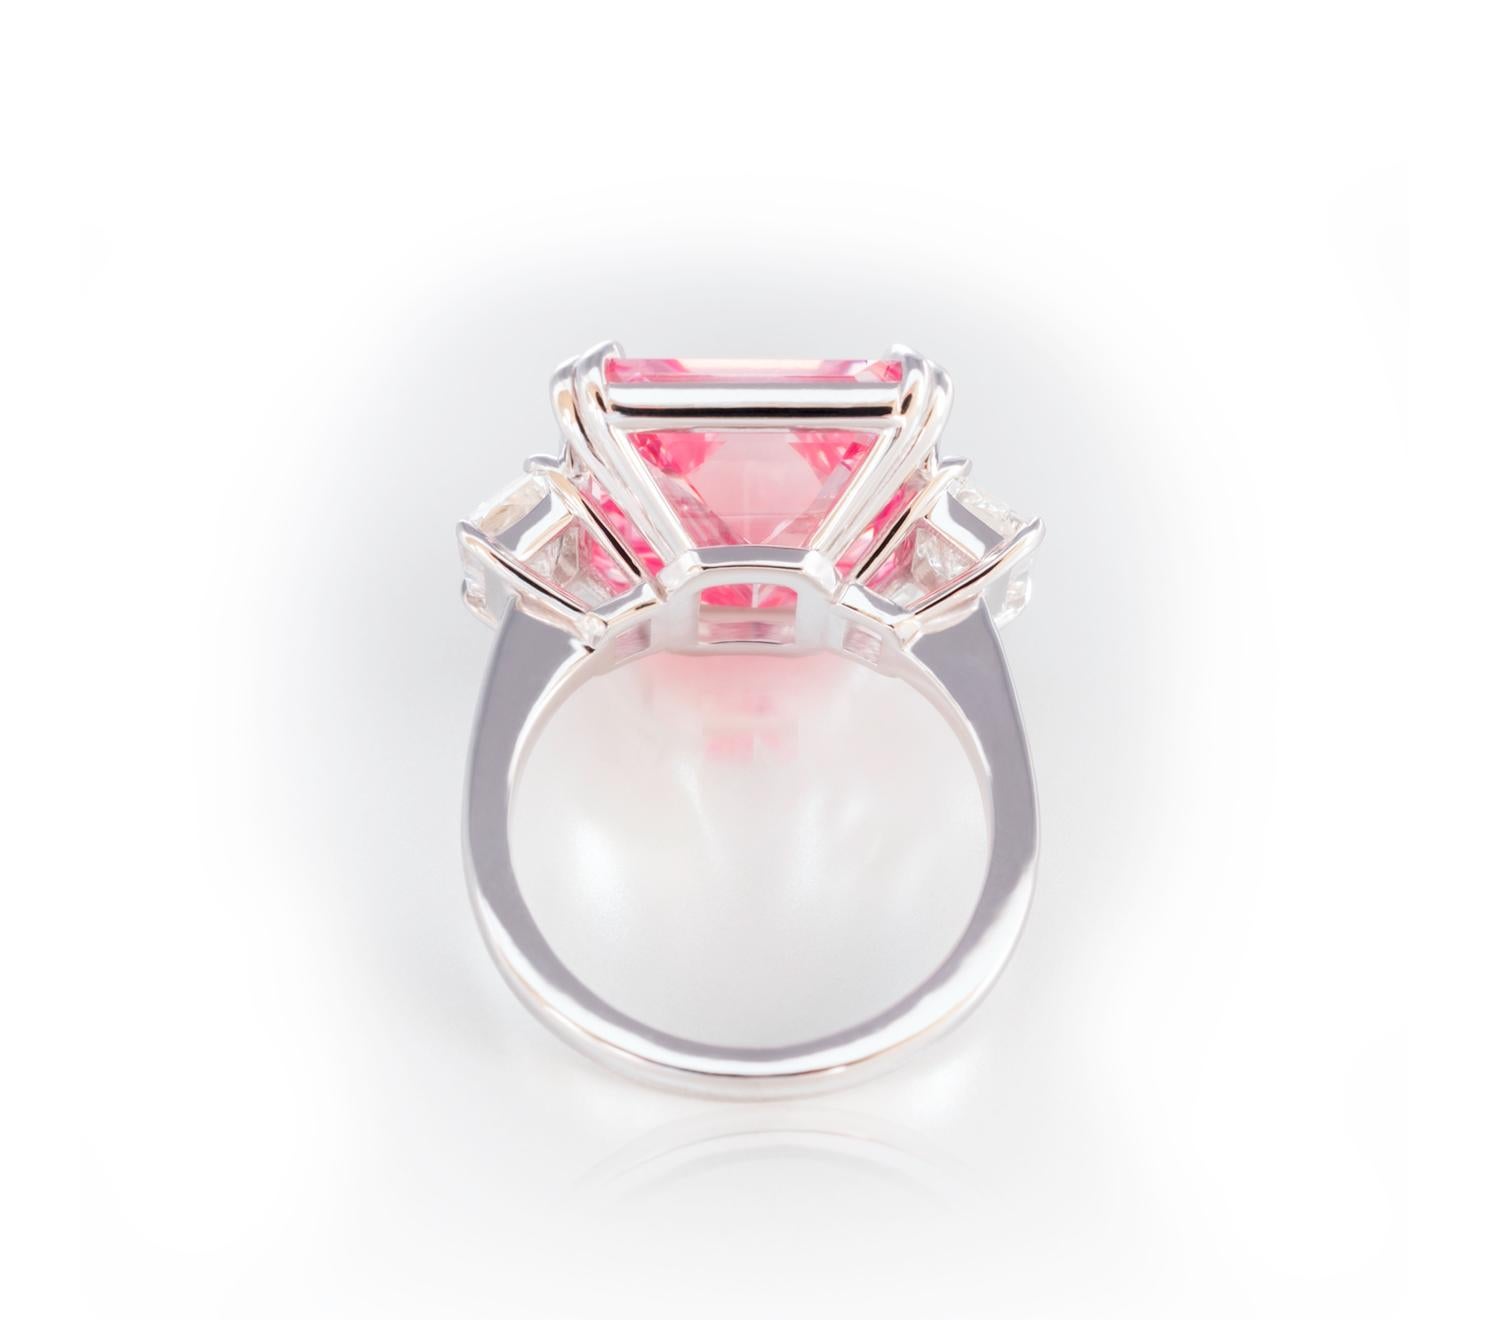 Women's 12 Carat Fancy Intense Pink Diamond Cocktail Ring with Emerald Cut GIA For Sale